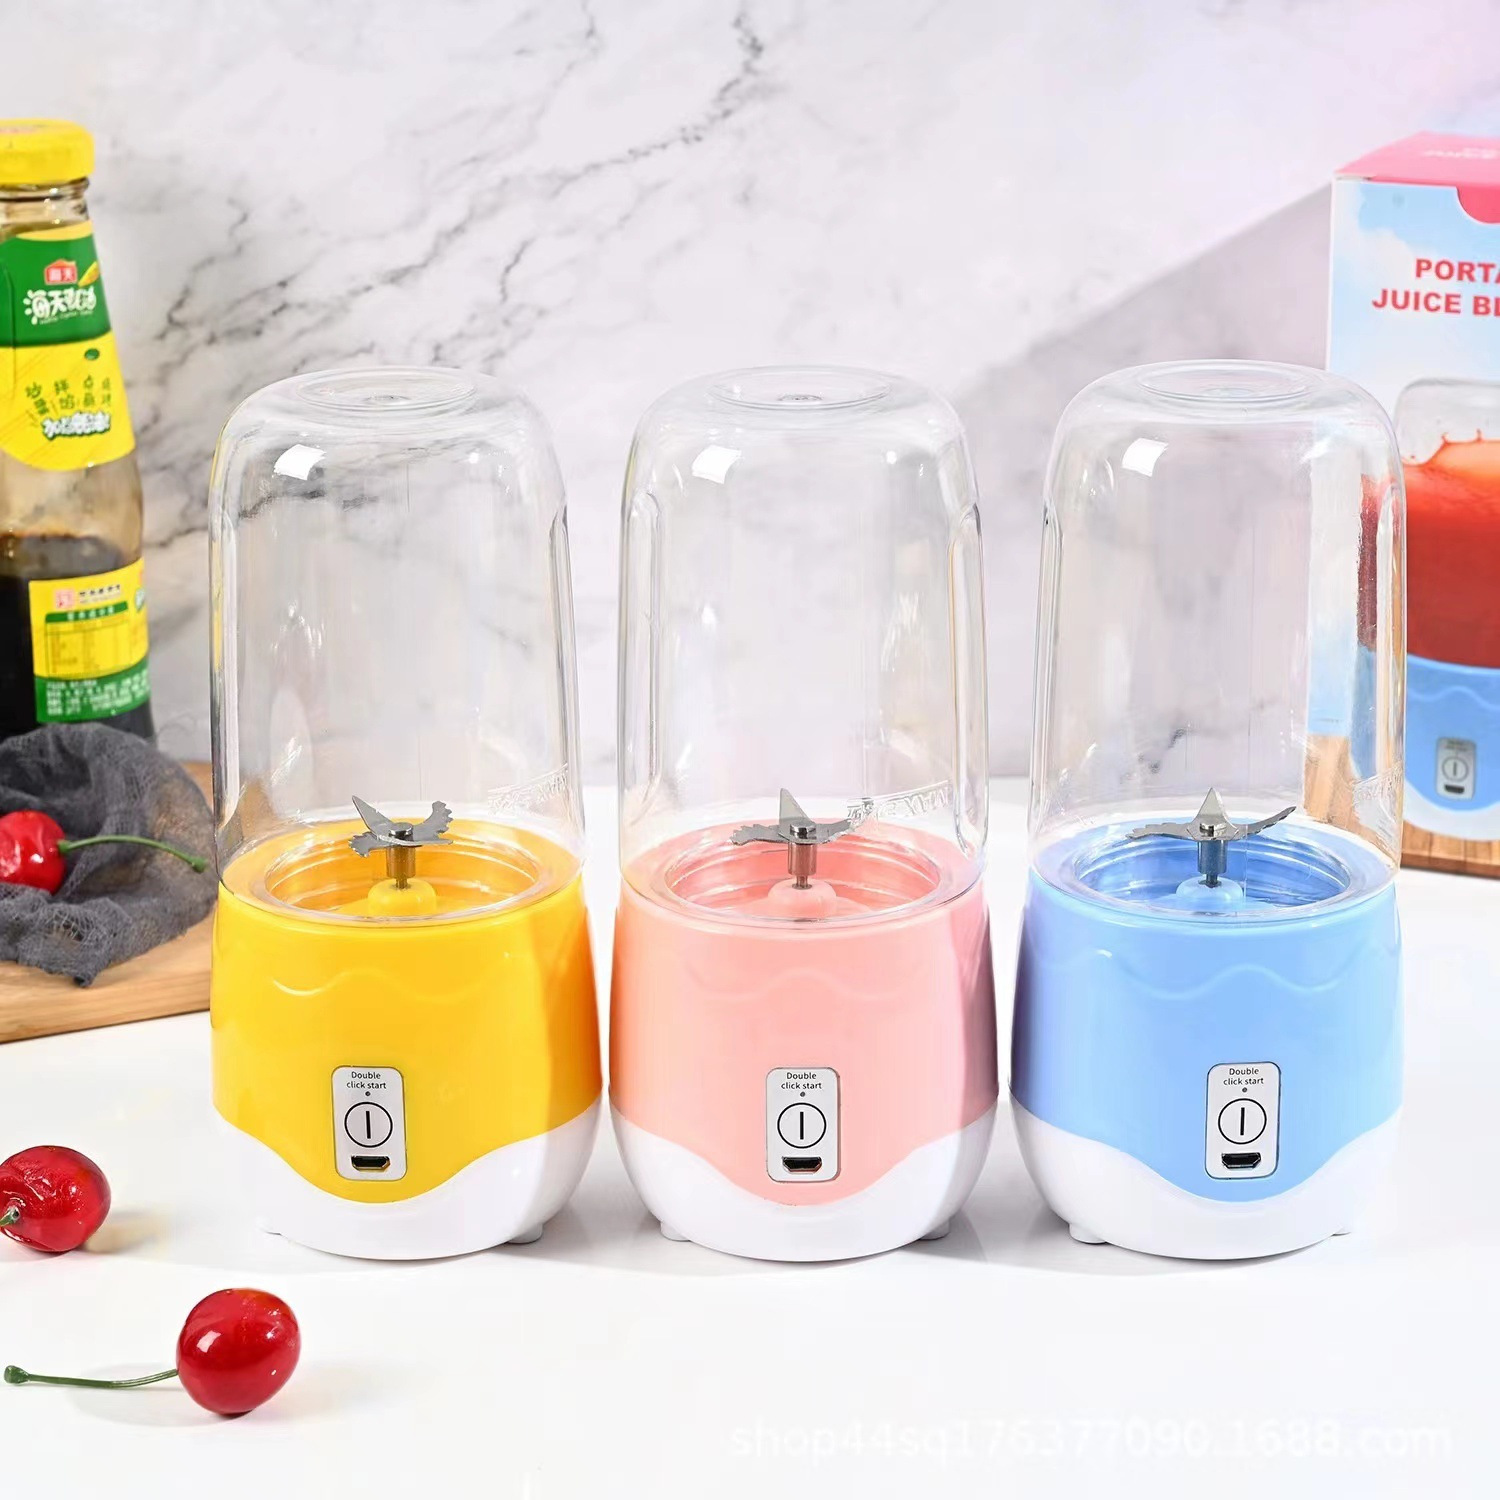 Chubby Pier Juicer Cup Portable Juice Juicer Cup Multi-Functional Household Small Juicer Cup